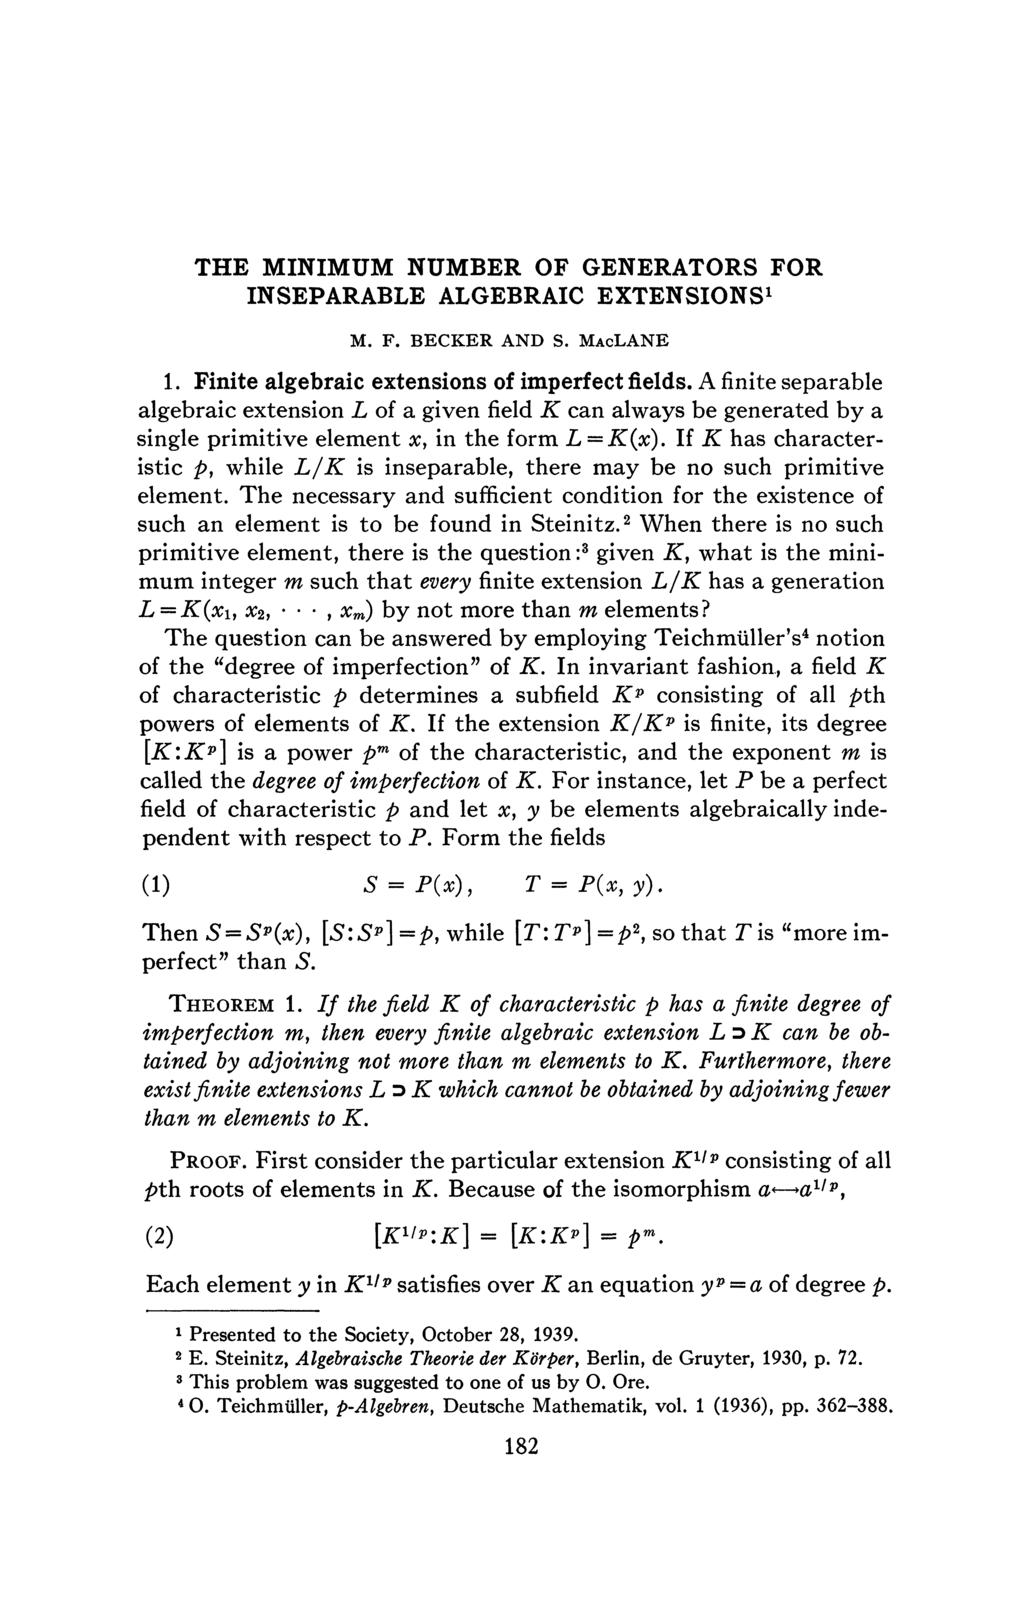 THE MINIMUM NUMBER OF GENERATORS FOR INSEPARABLE ALGEBRAIC EXTENSIONS 1 M. F. BECKER AND S. MACLANE 1. Finite algebraic extensions of imperfect fields.